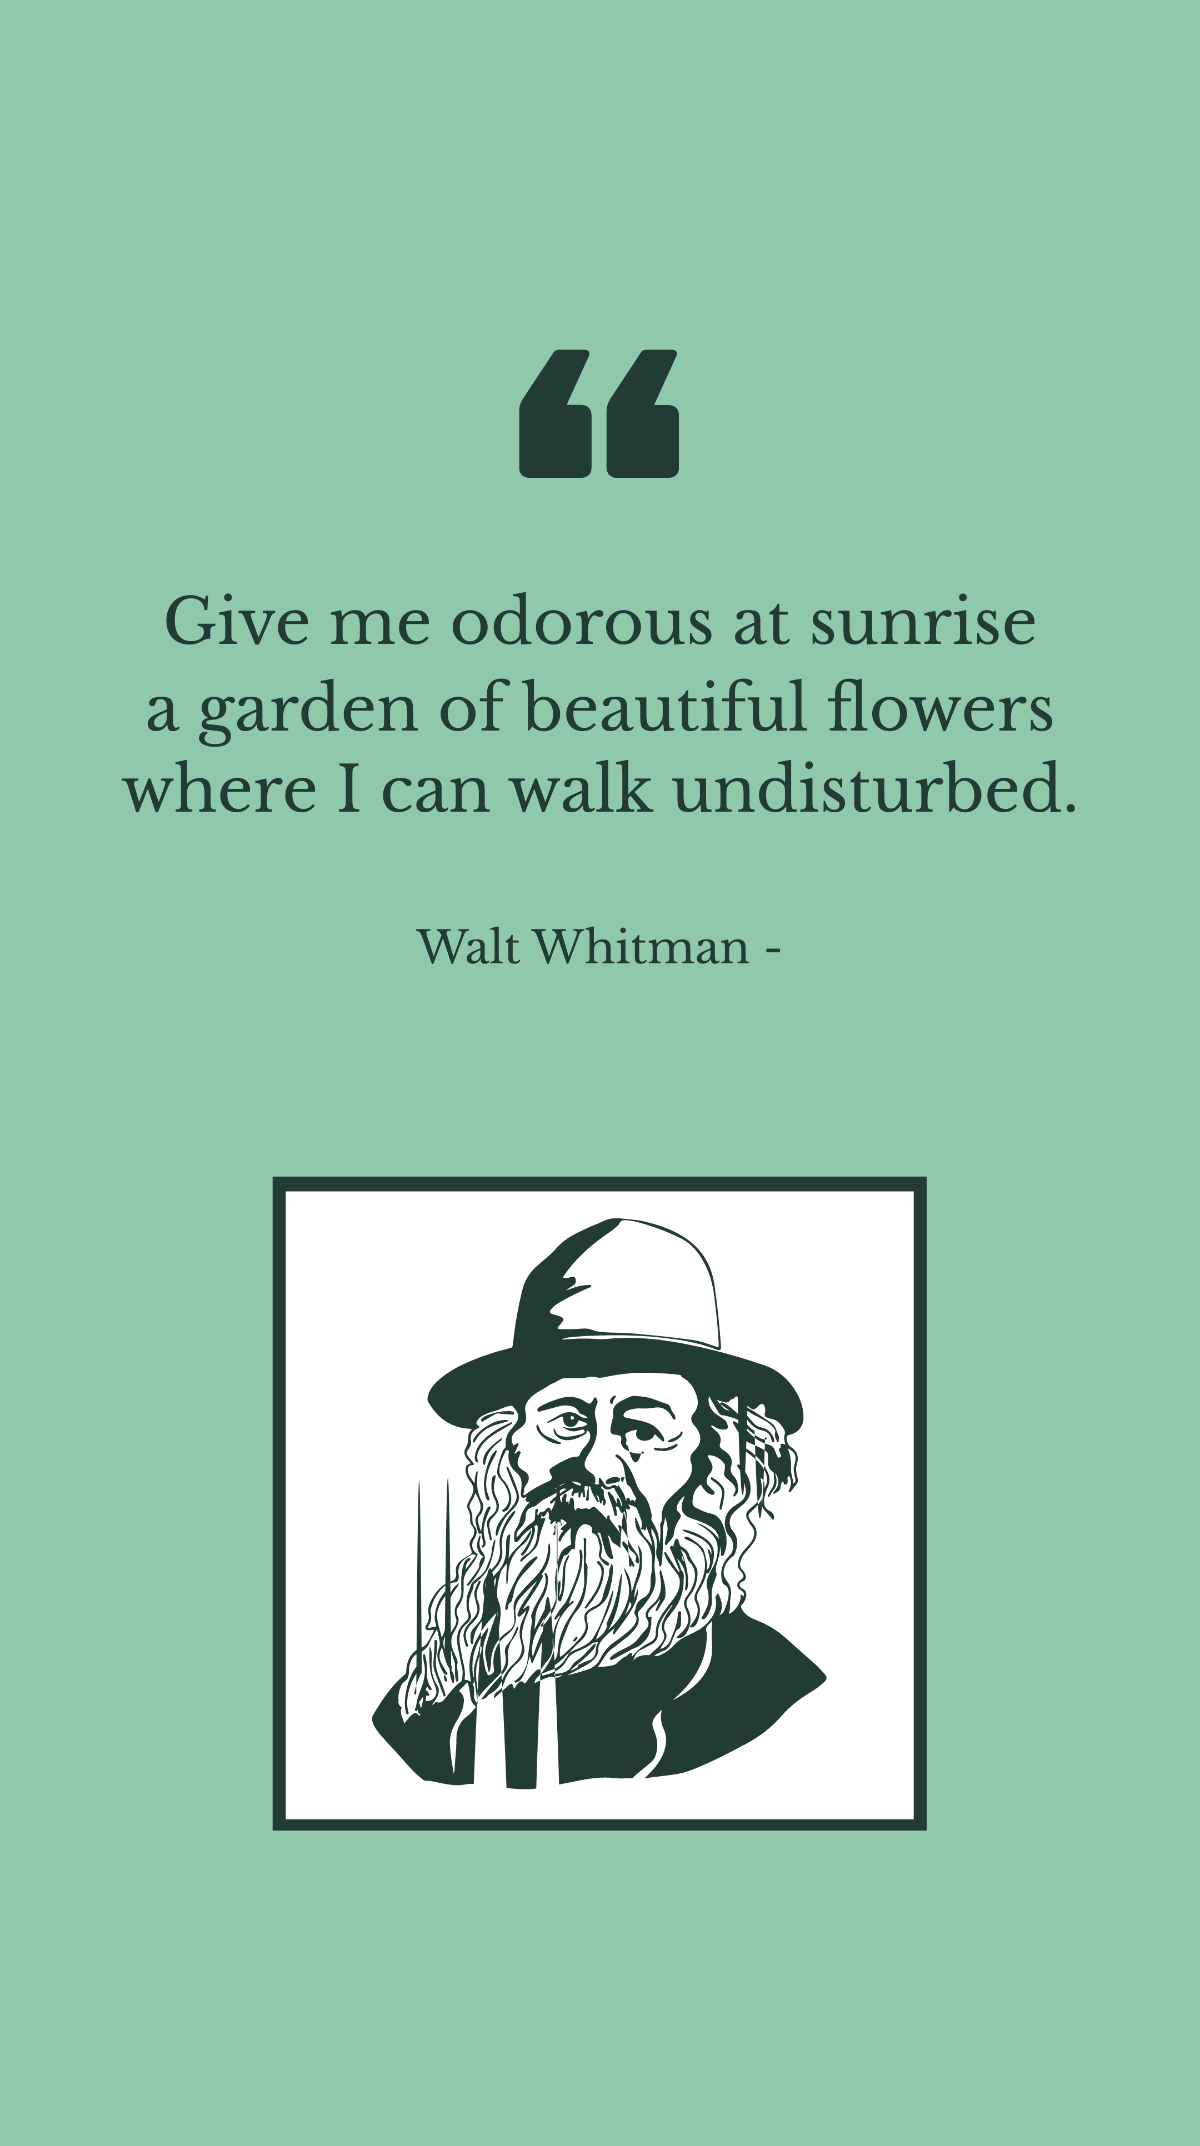 Free Walt Whitman - Give me odorous at sunrise a garden of beautiful flowers where I can walk undisturbed. Template